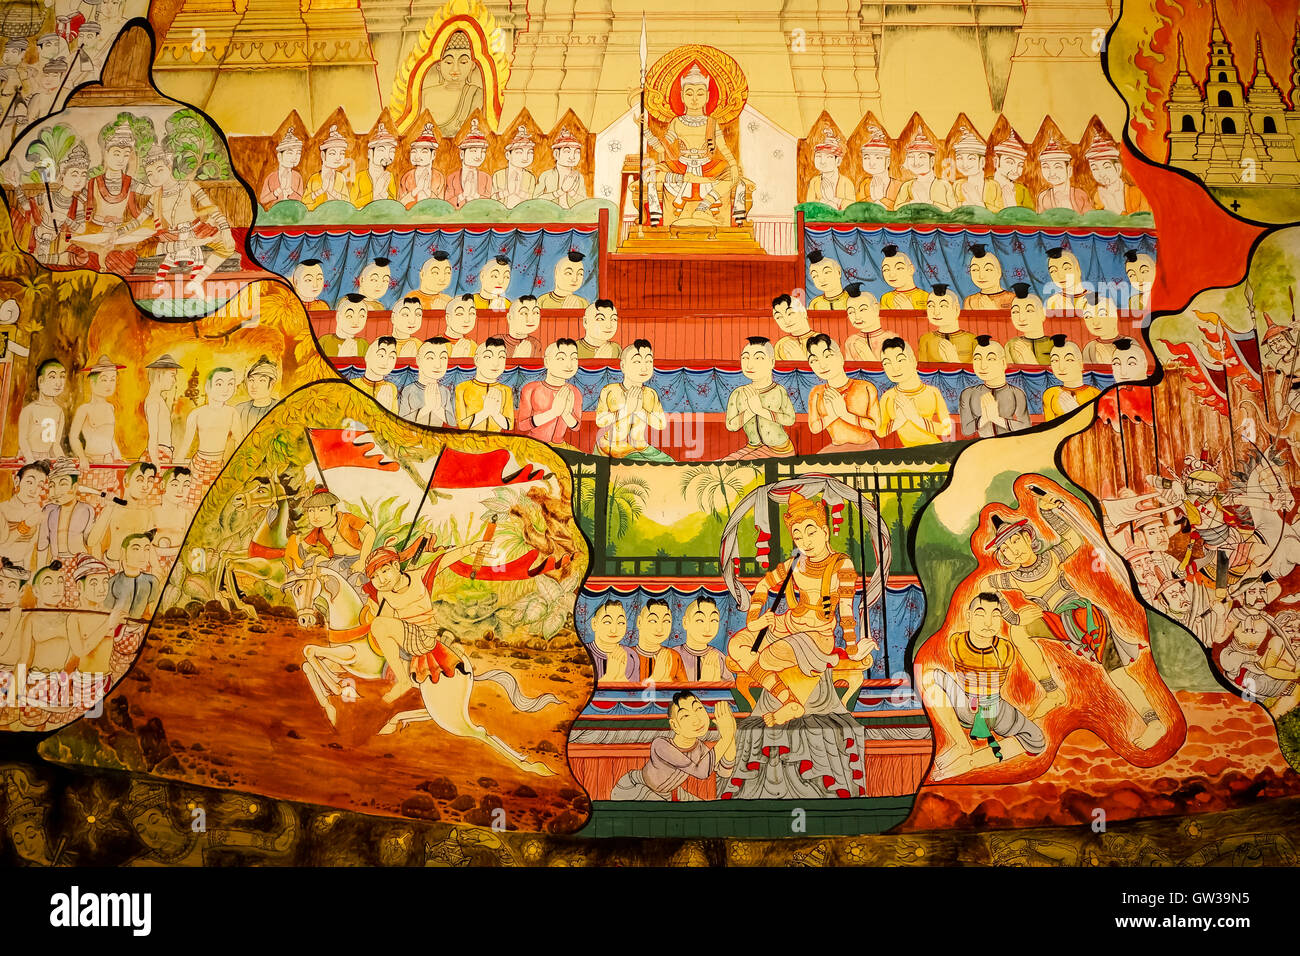 Traditional Thai style art painting on temple's wall (Ramayana story) Stock Photo